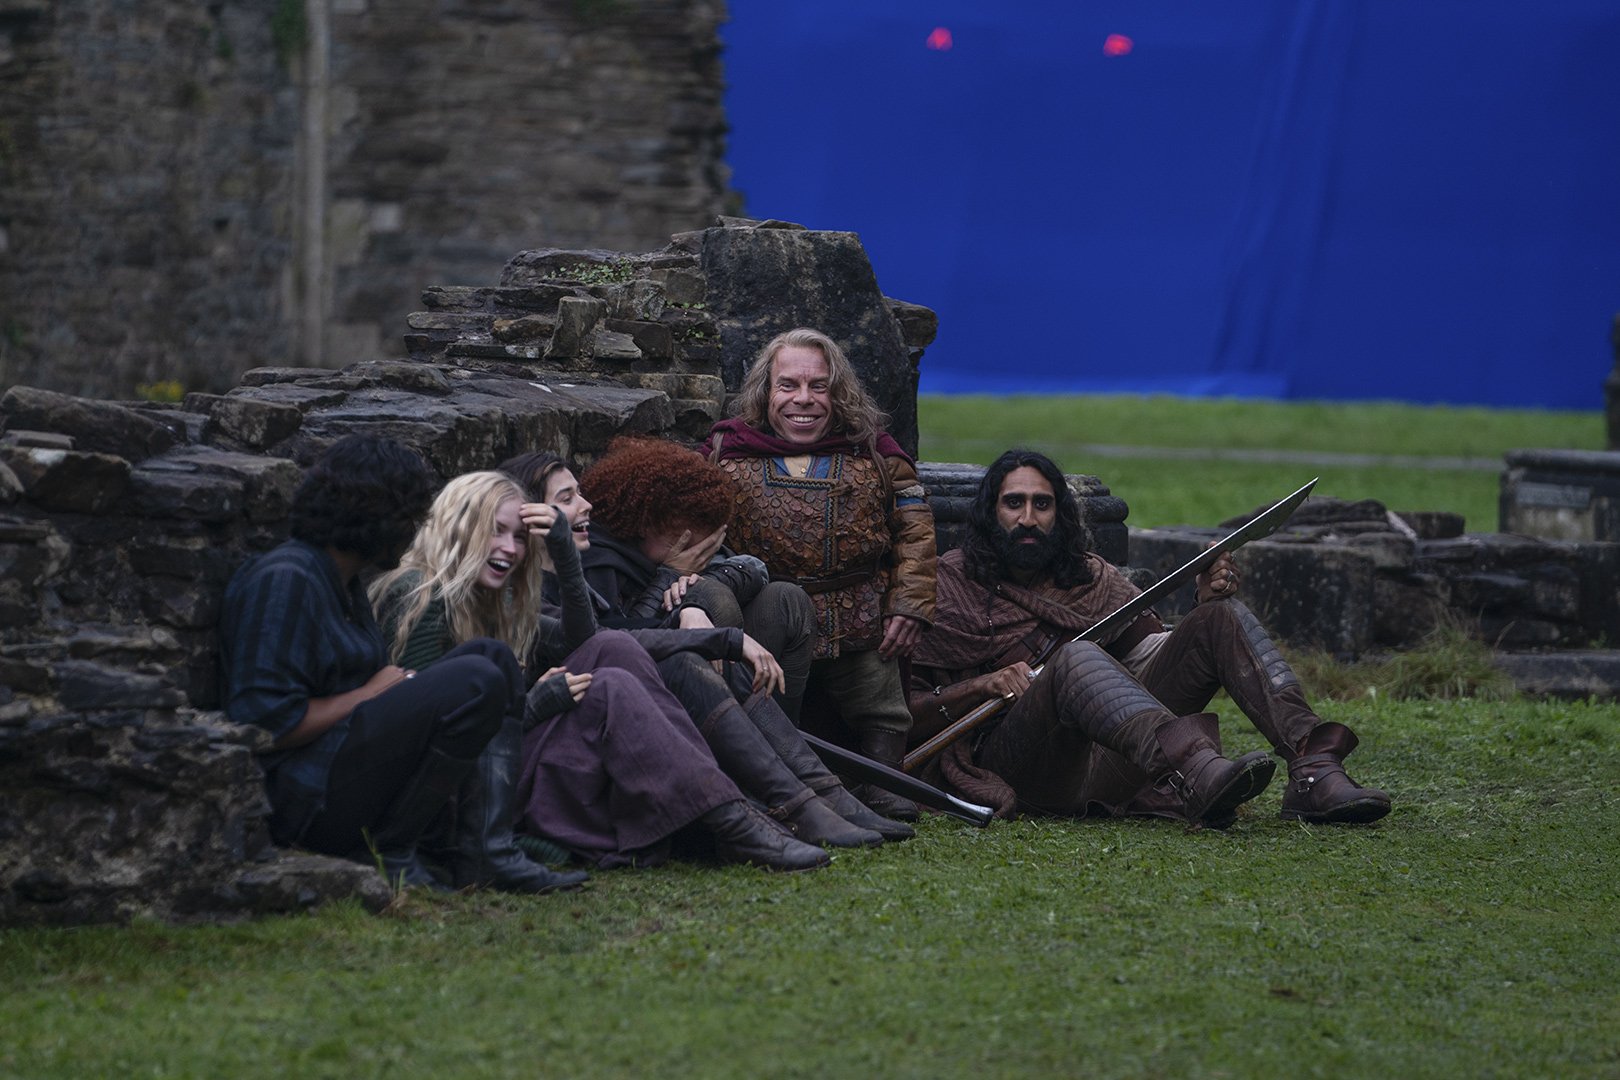 A behind the scenes image of the cast before fighting the Gales